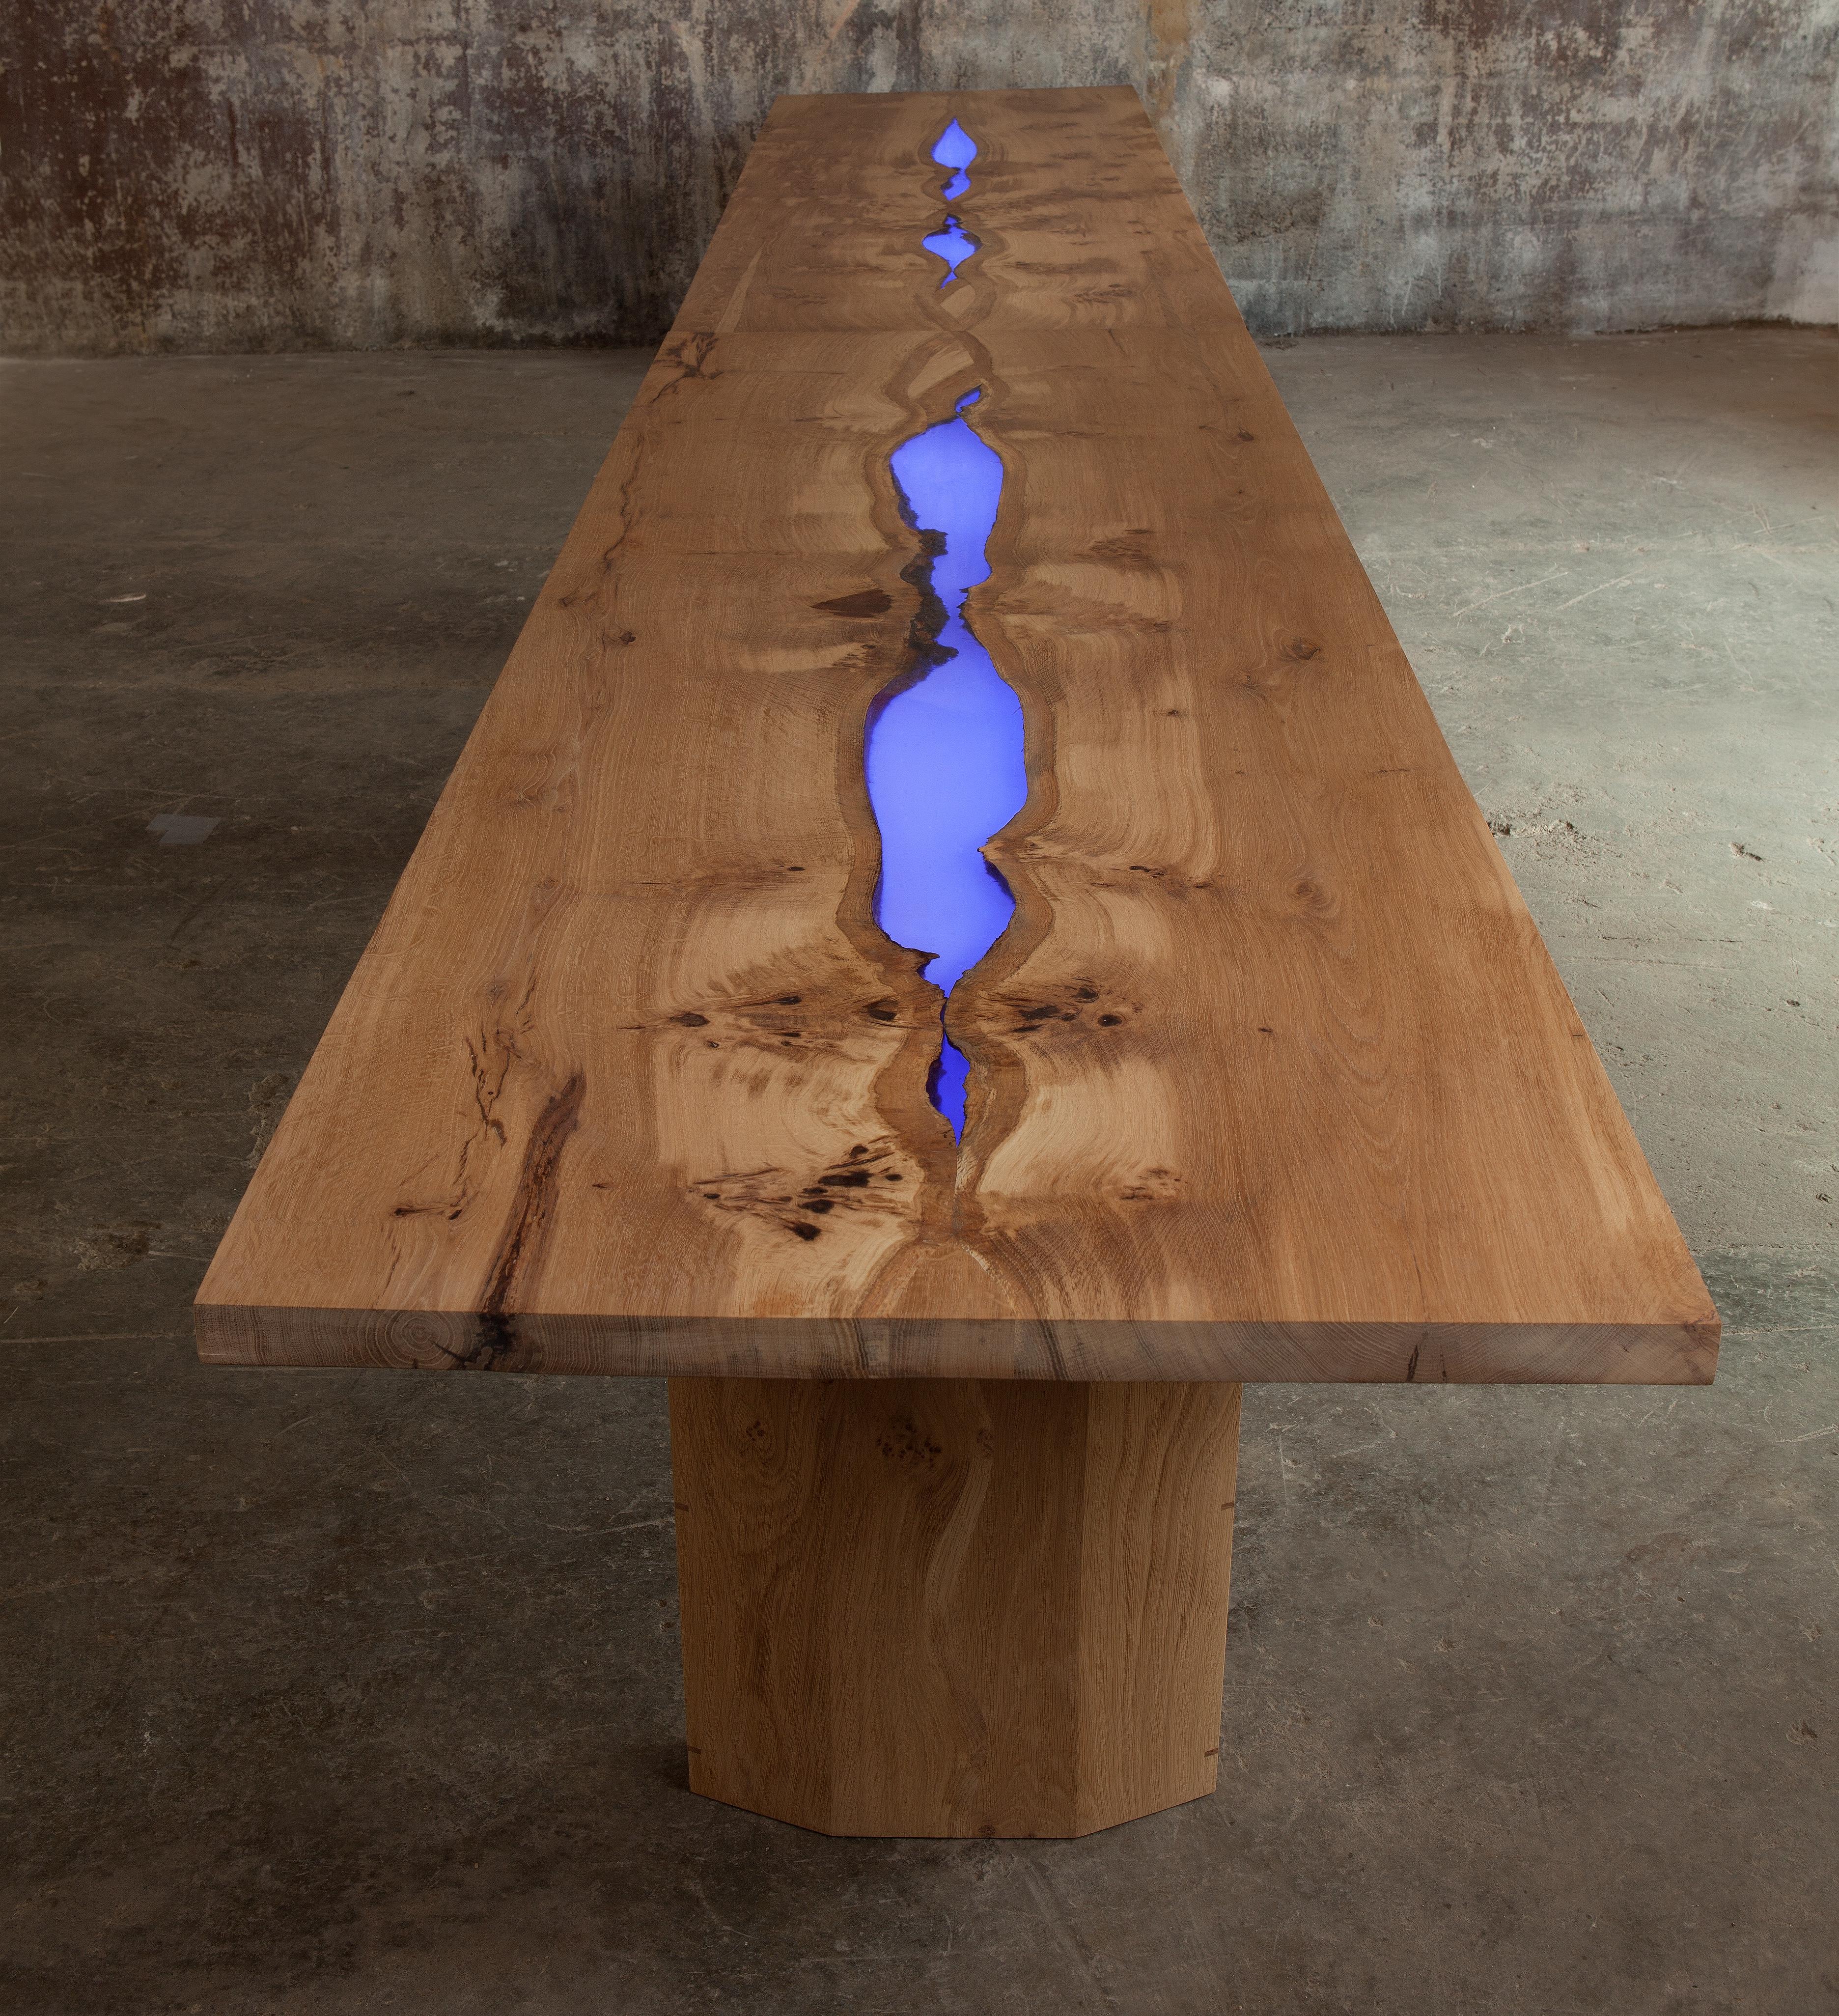 Contemporary English Oak Table, river resin book-matched English oak by Jonathan Field